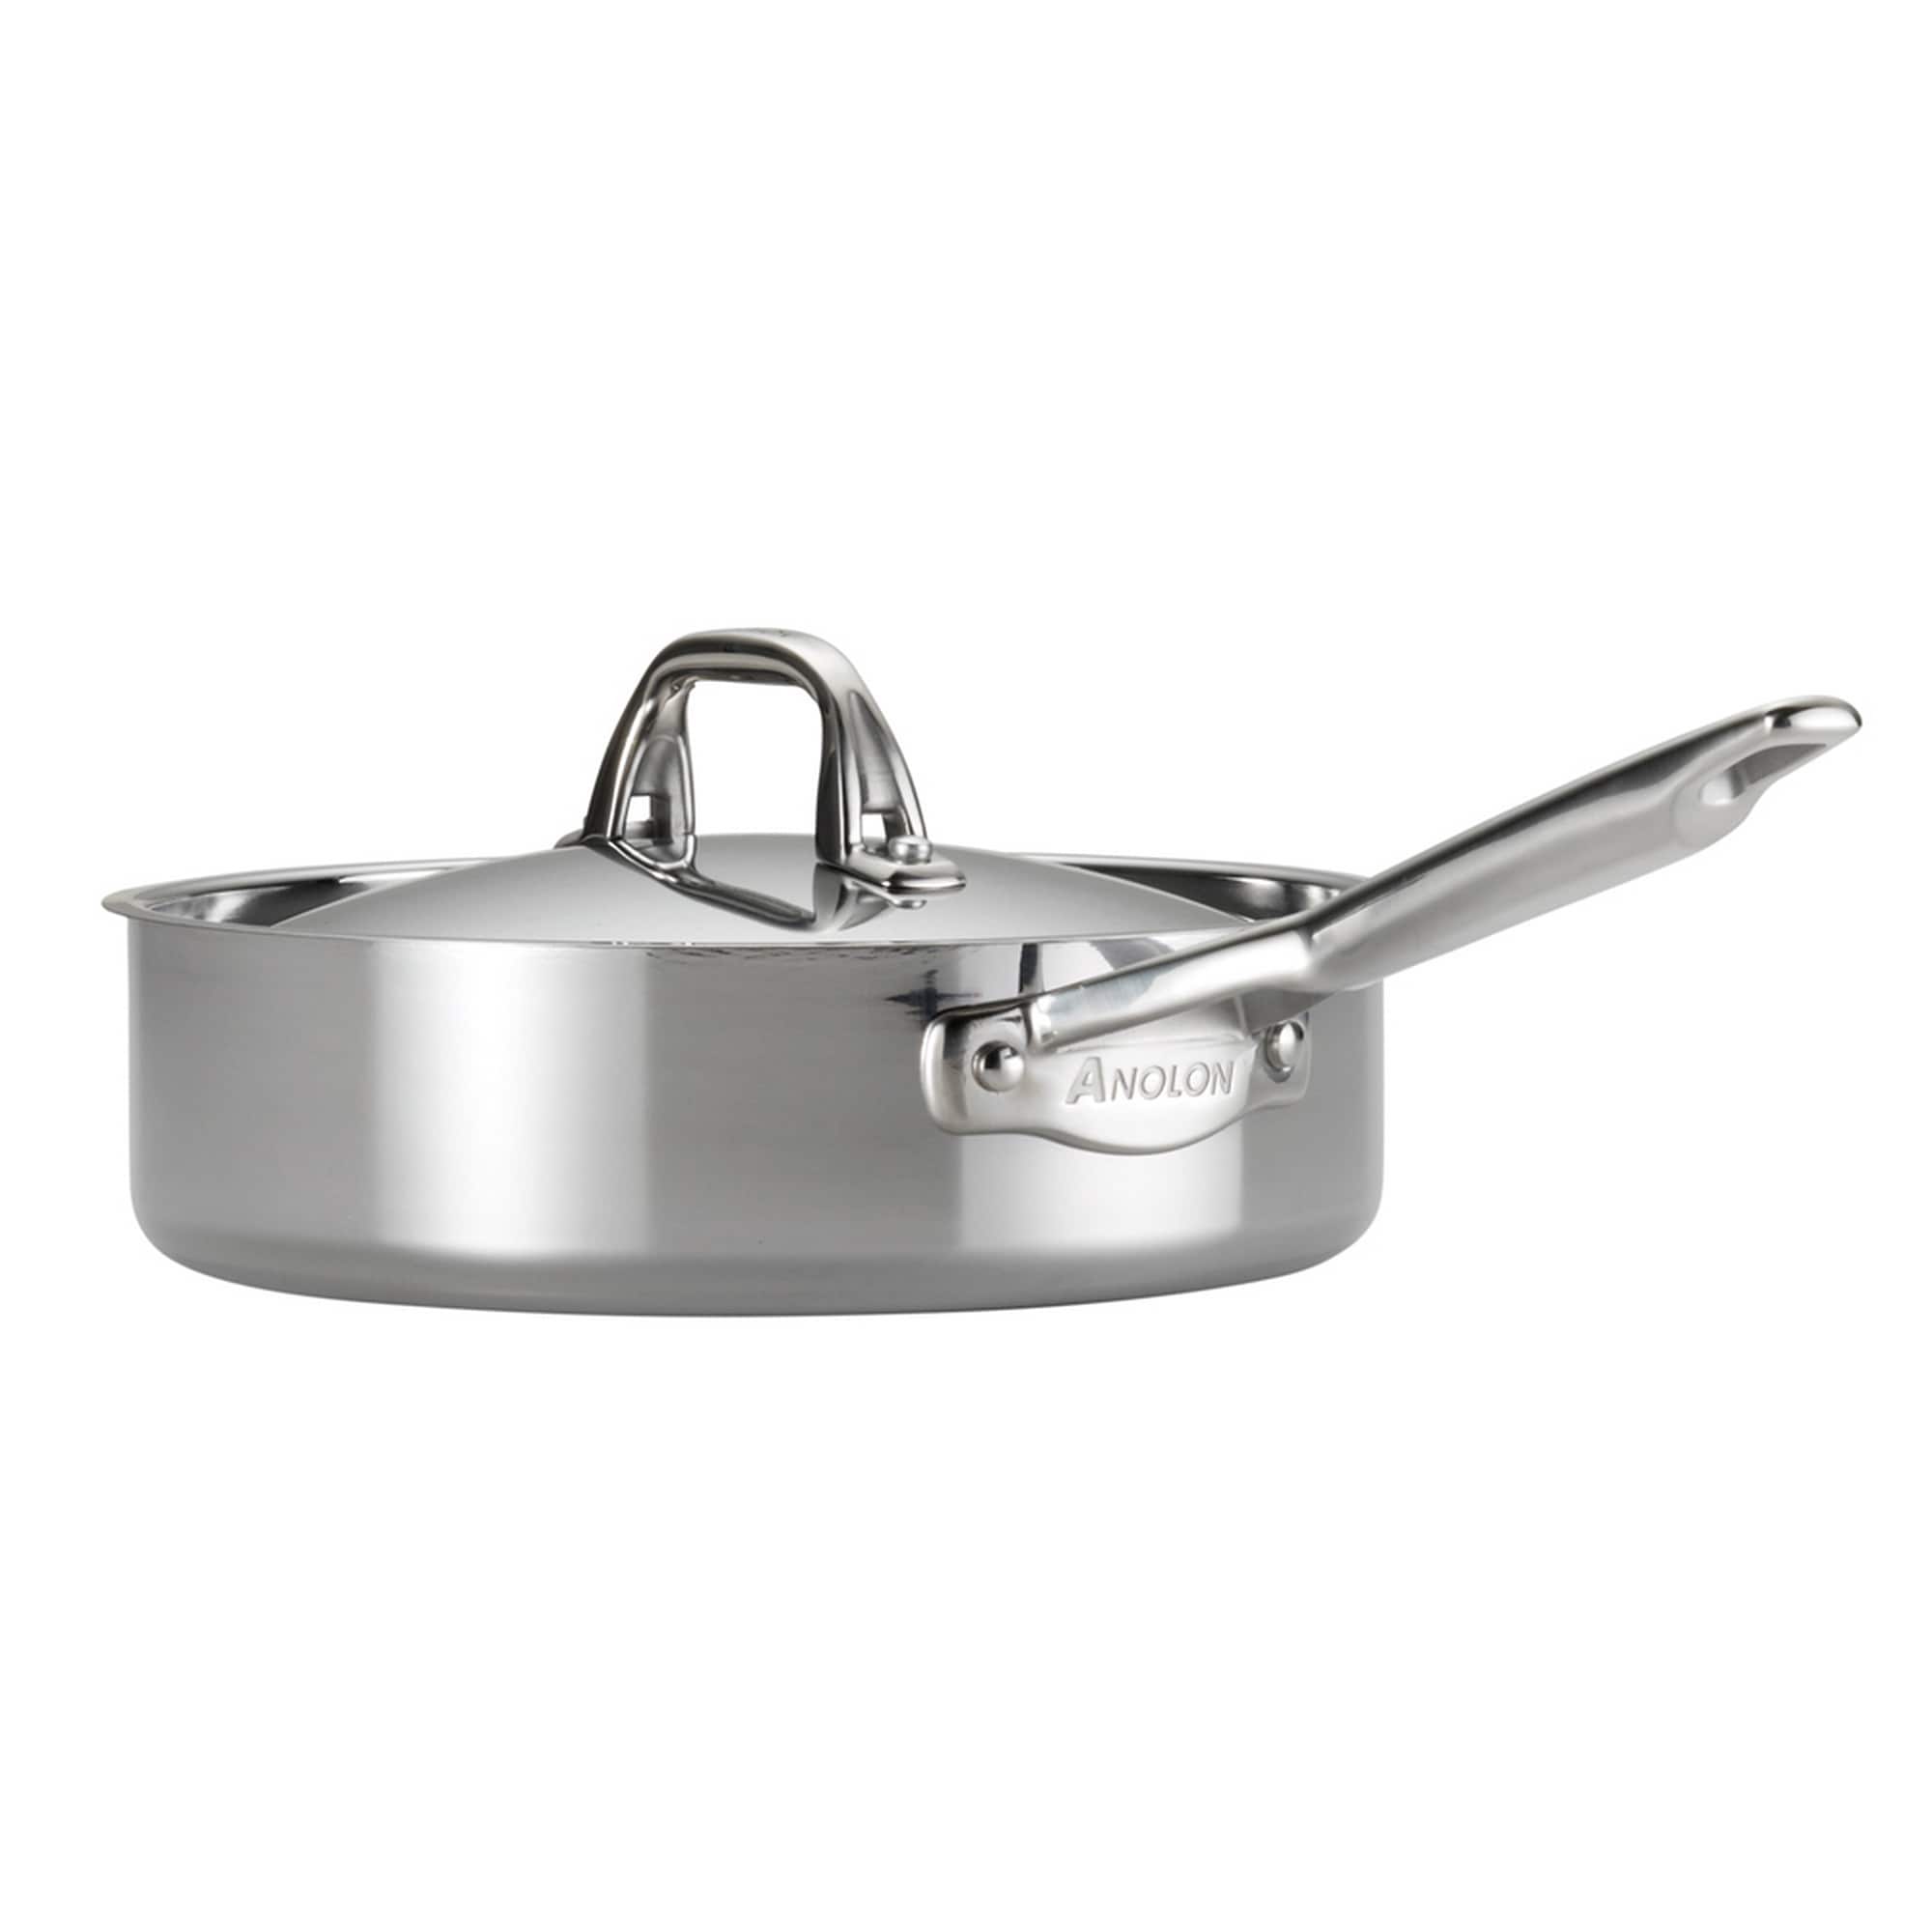 https://ak1.ostkcdn.com/images/products/9206669/Anolon-Tri-Ply-Clad-Stainless-Steel-12-piece-Cookware-Set-084c21ab-e149-4318-b11c-81d438fb8fa1.jpg